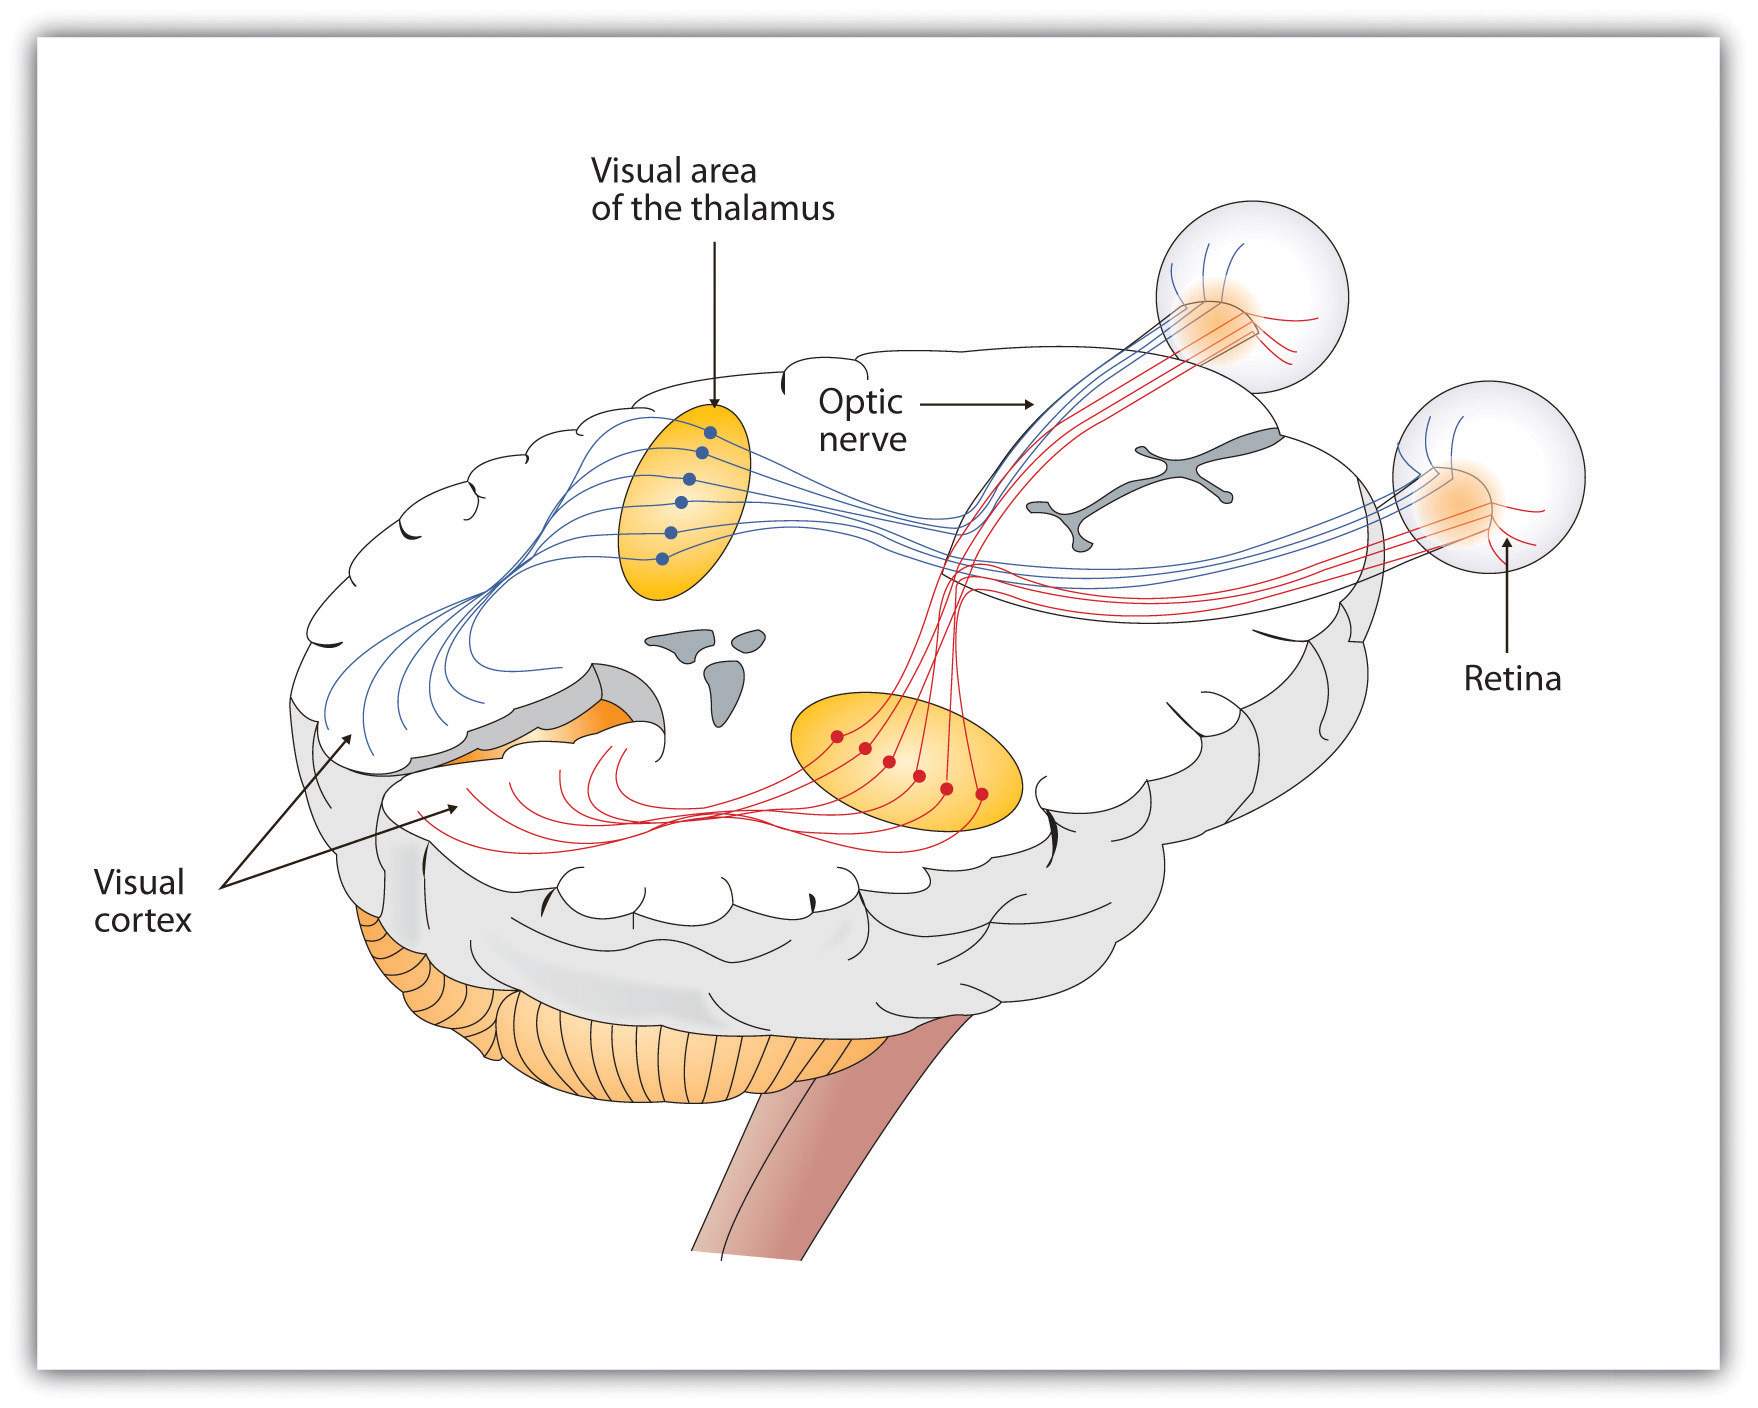 Pathway of visual images through the thalamus and into the visual cortex